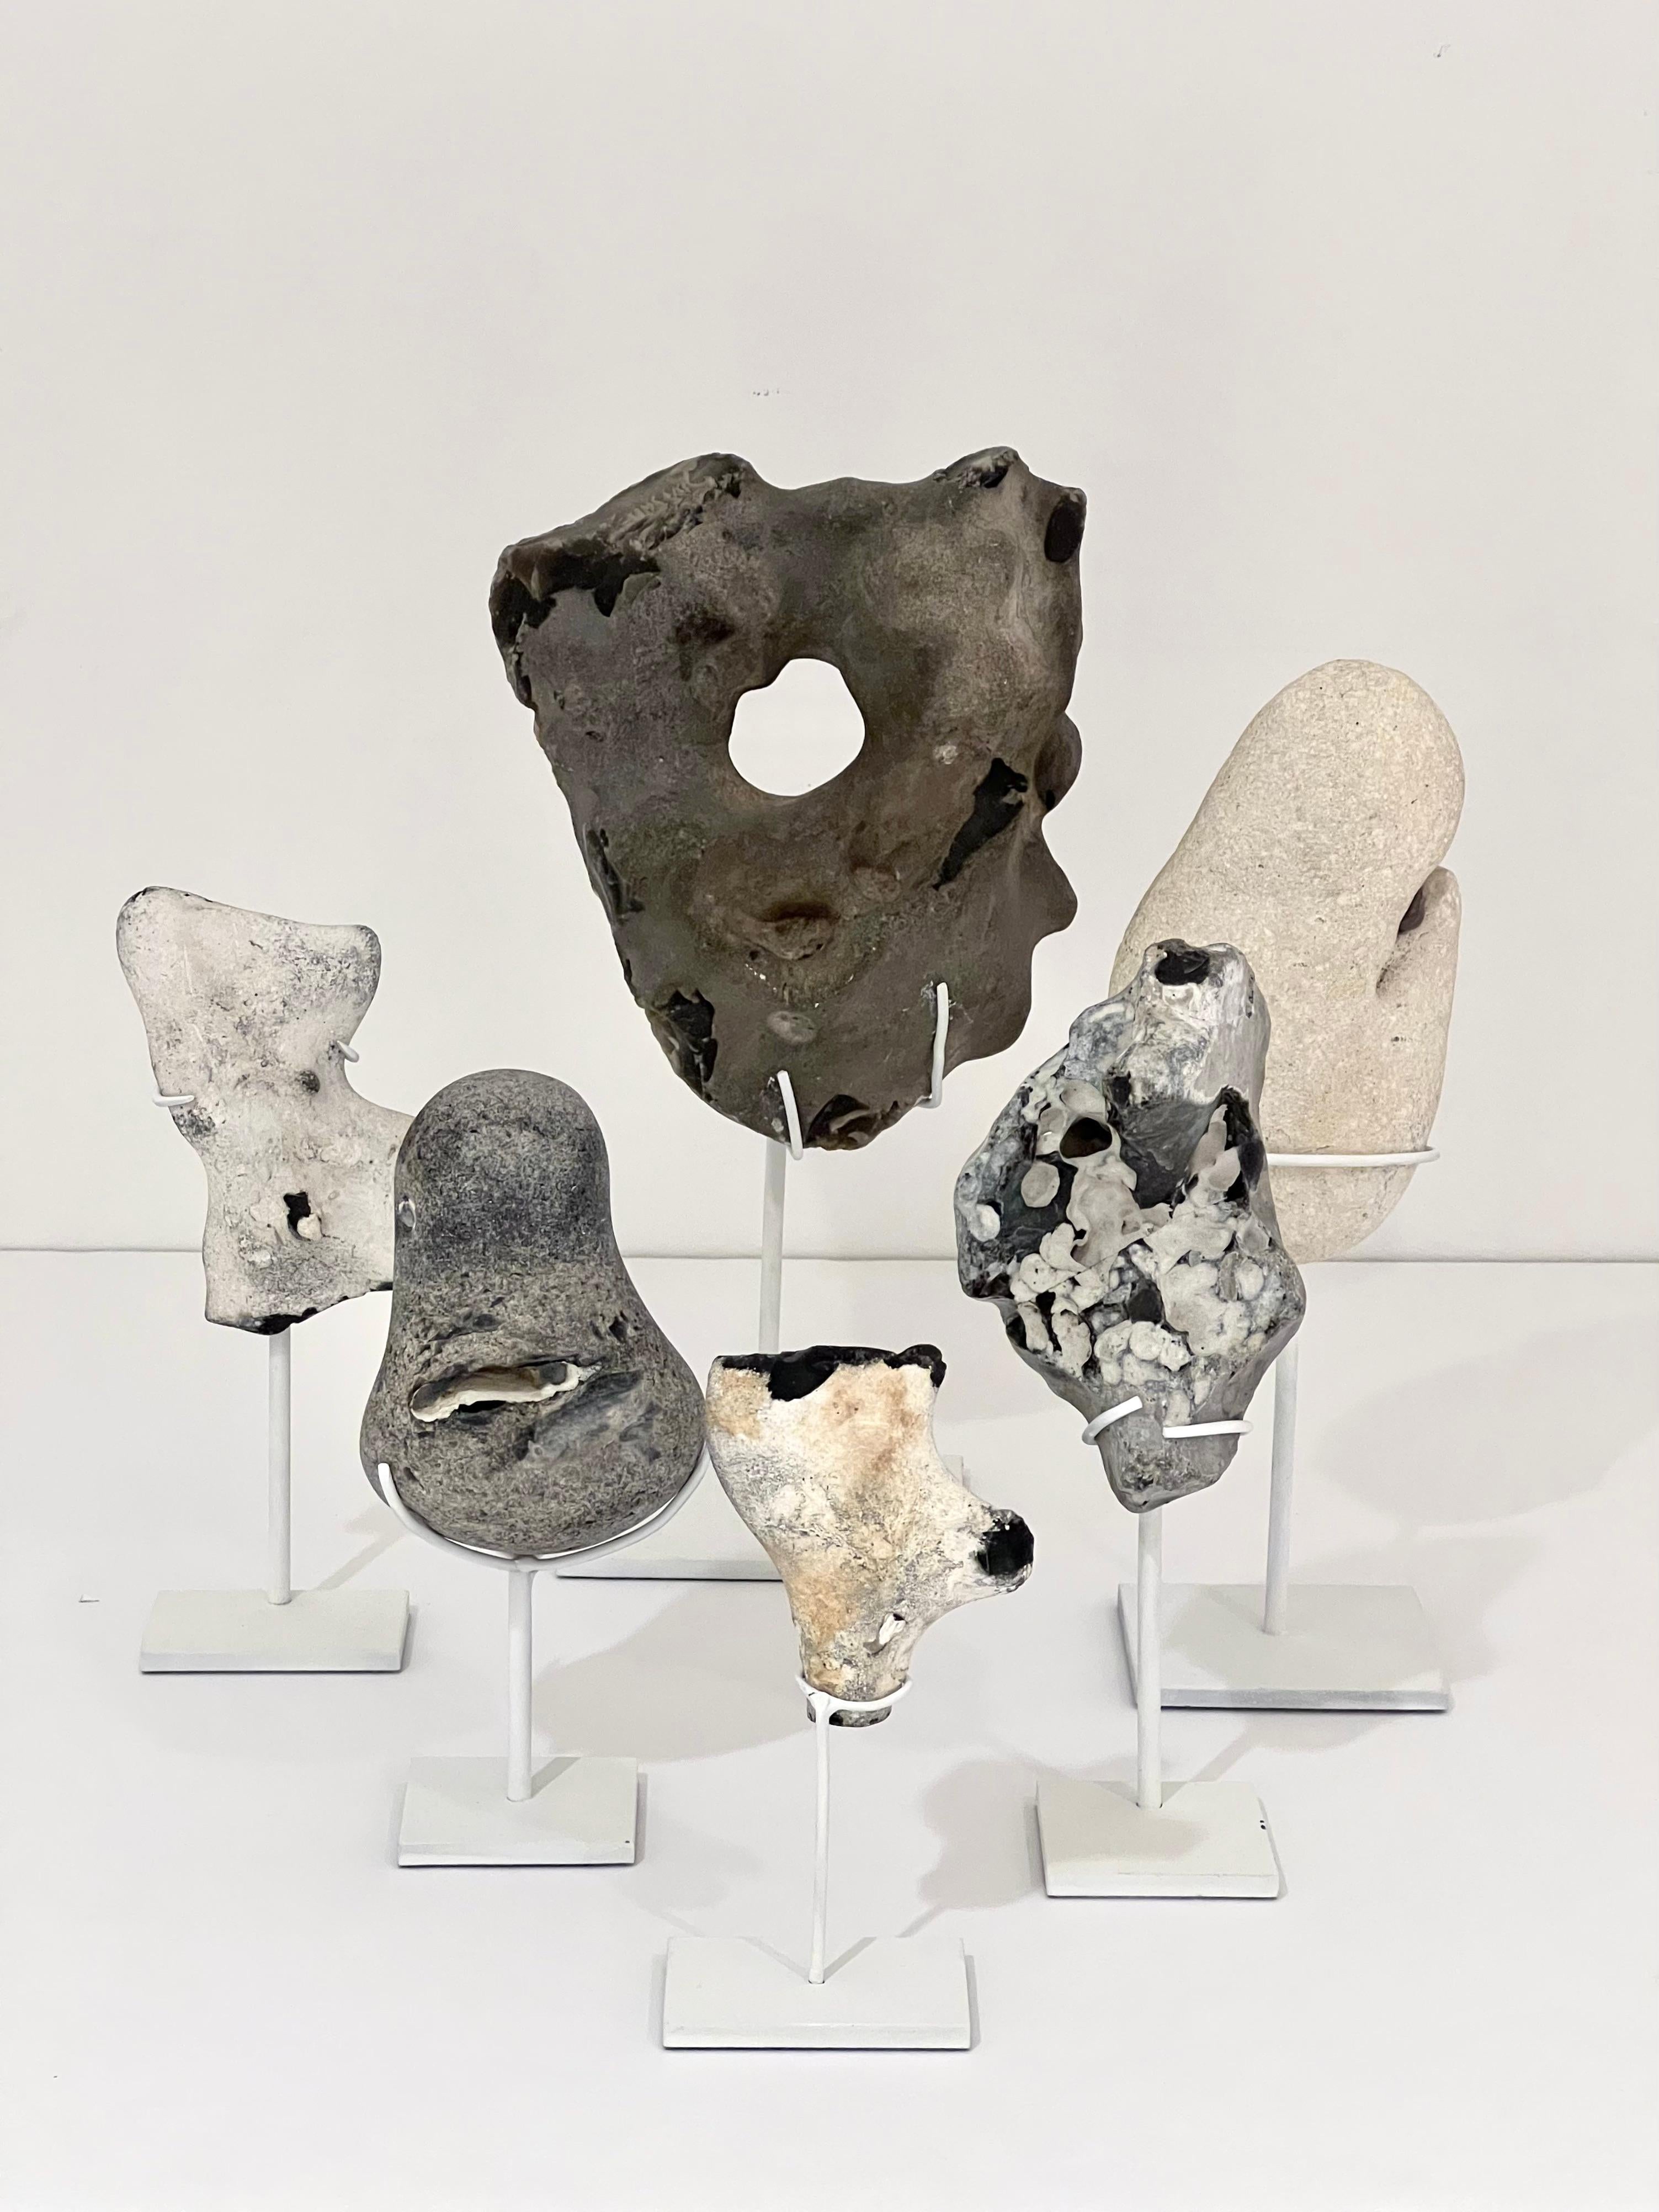 A delightful grouping of natural sea stone specimens of flint and chalk from the shores of Denmark. Each stone is unique with the result of years of erosion and shaping. They are priced as a set of 6 stones on metal mounts, as shown in the pictures.